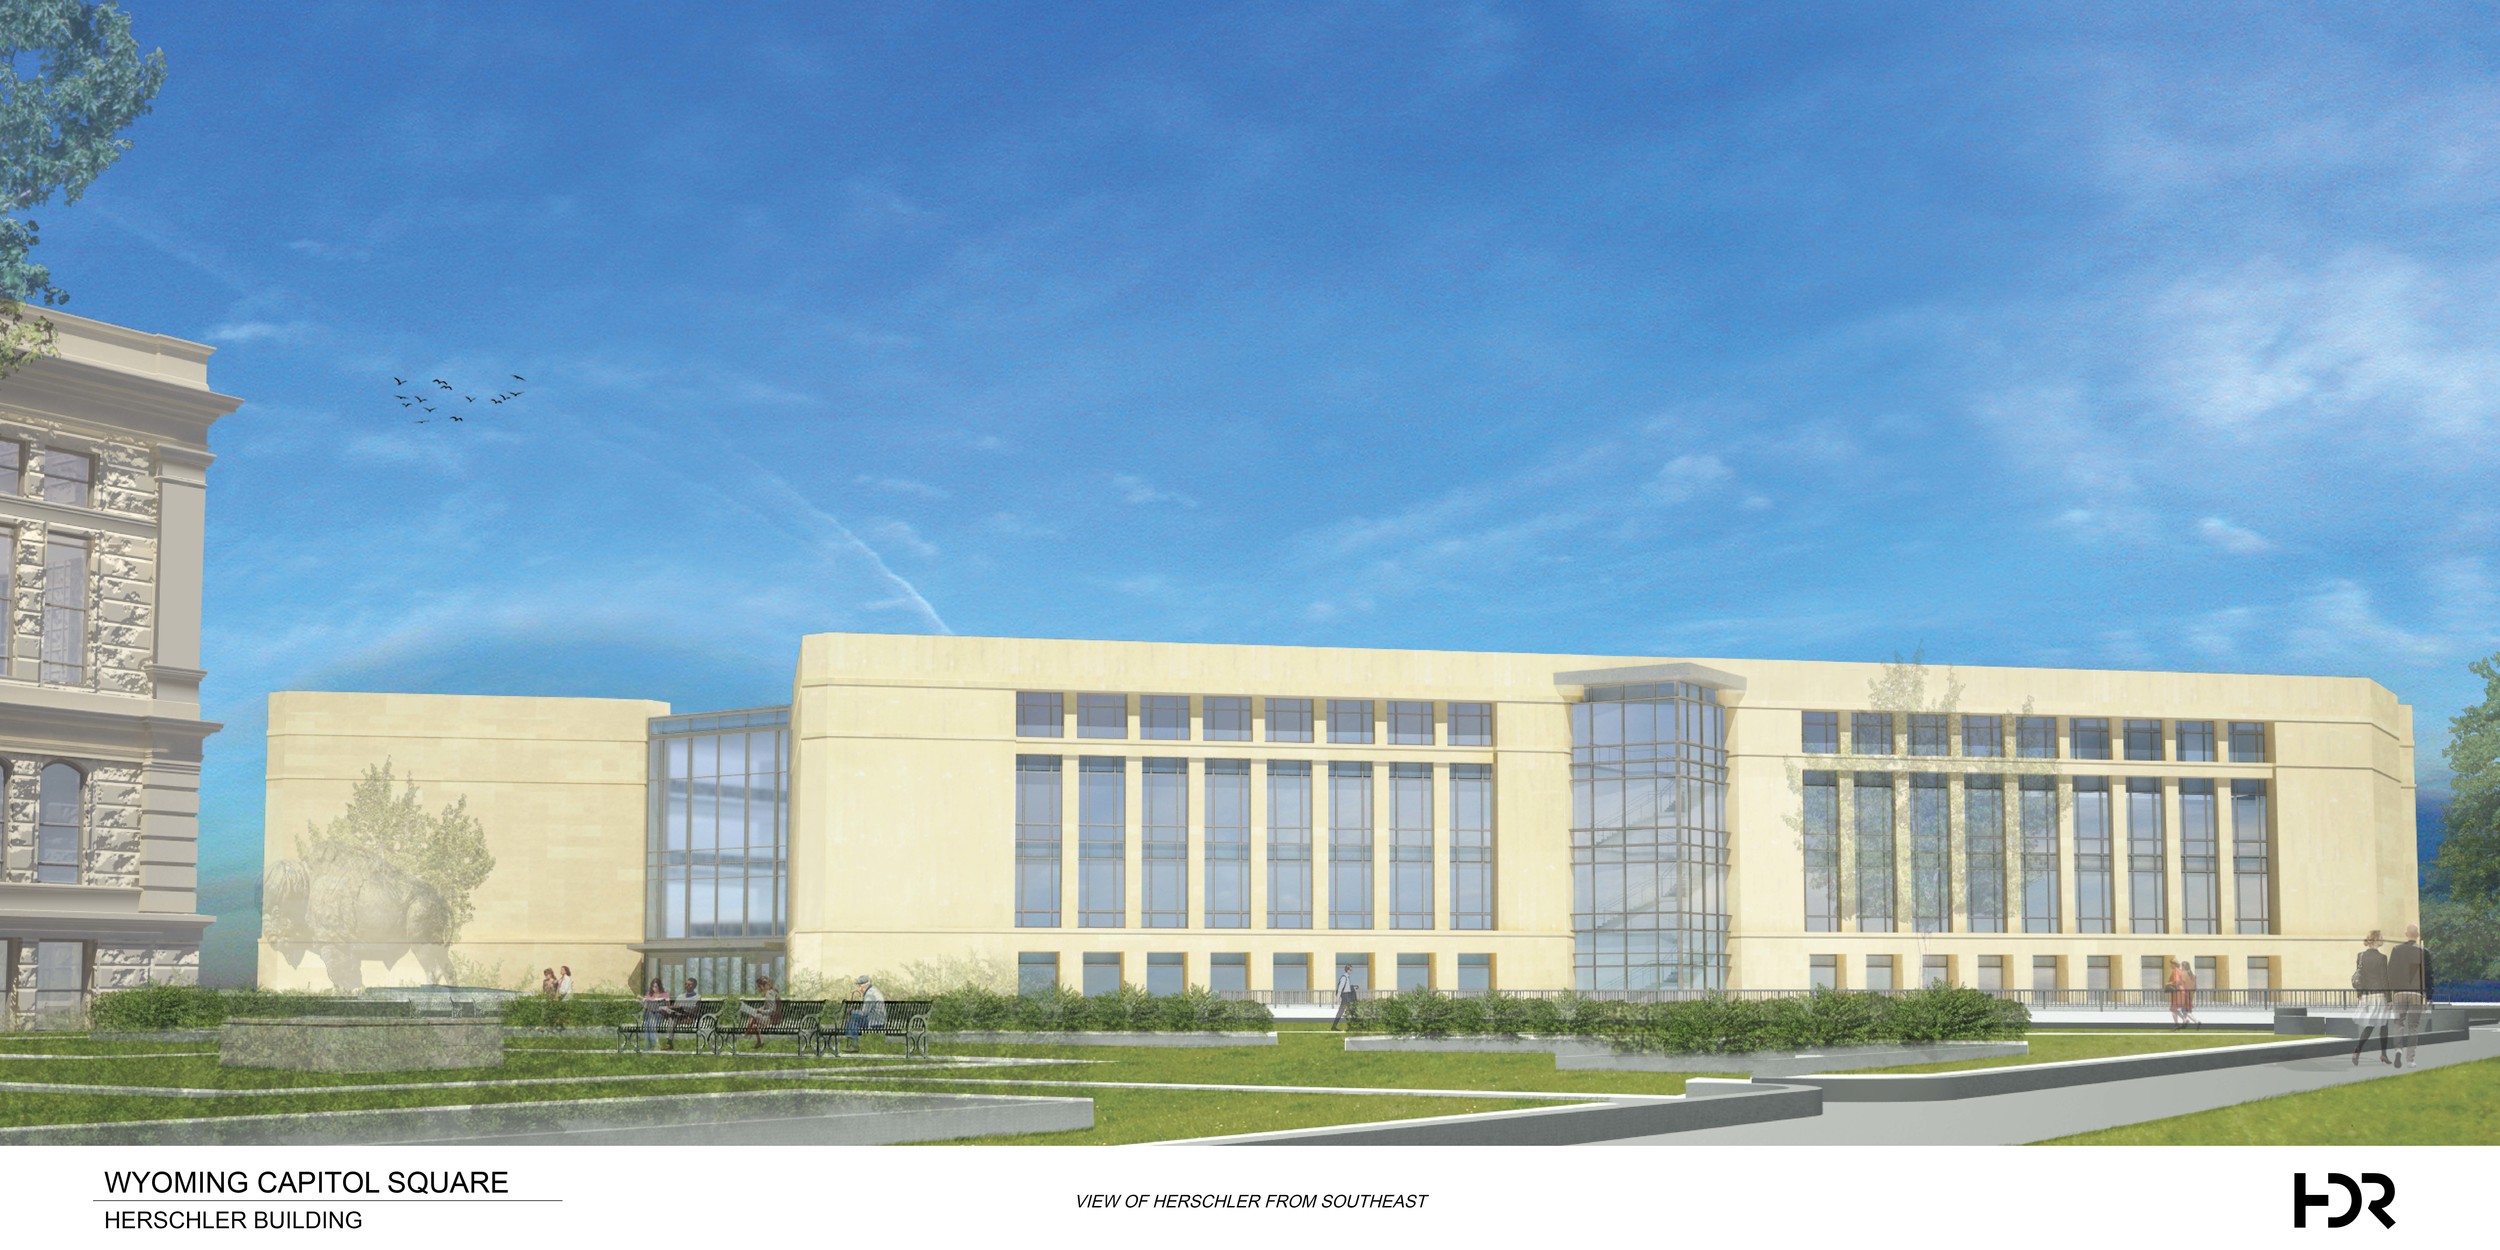 Conceptual drawing of the Herschler Building exterior